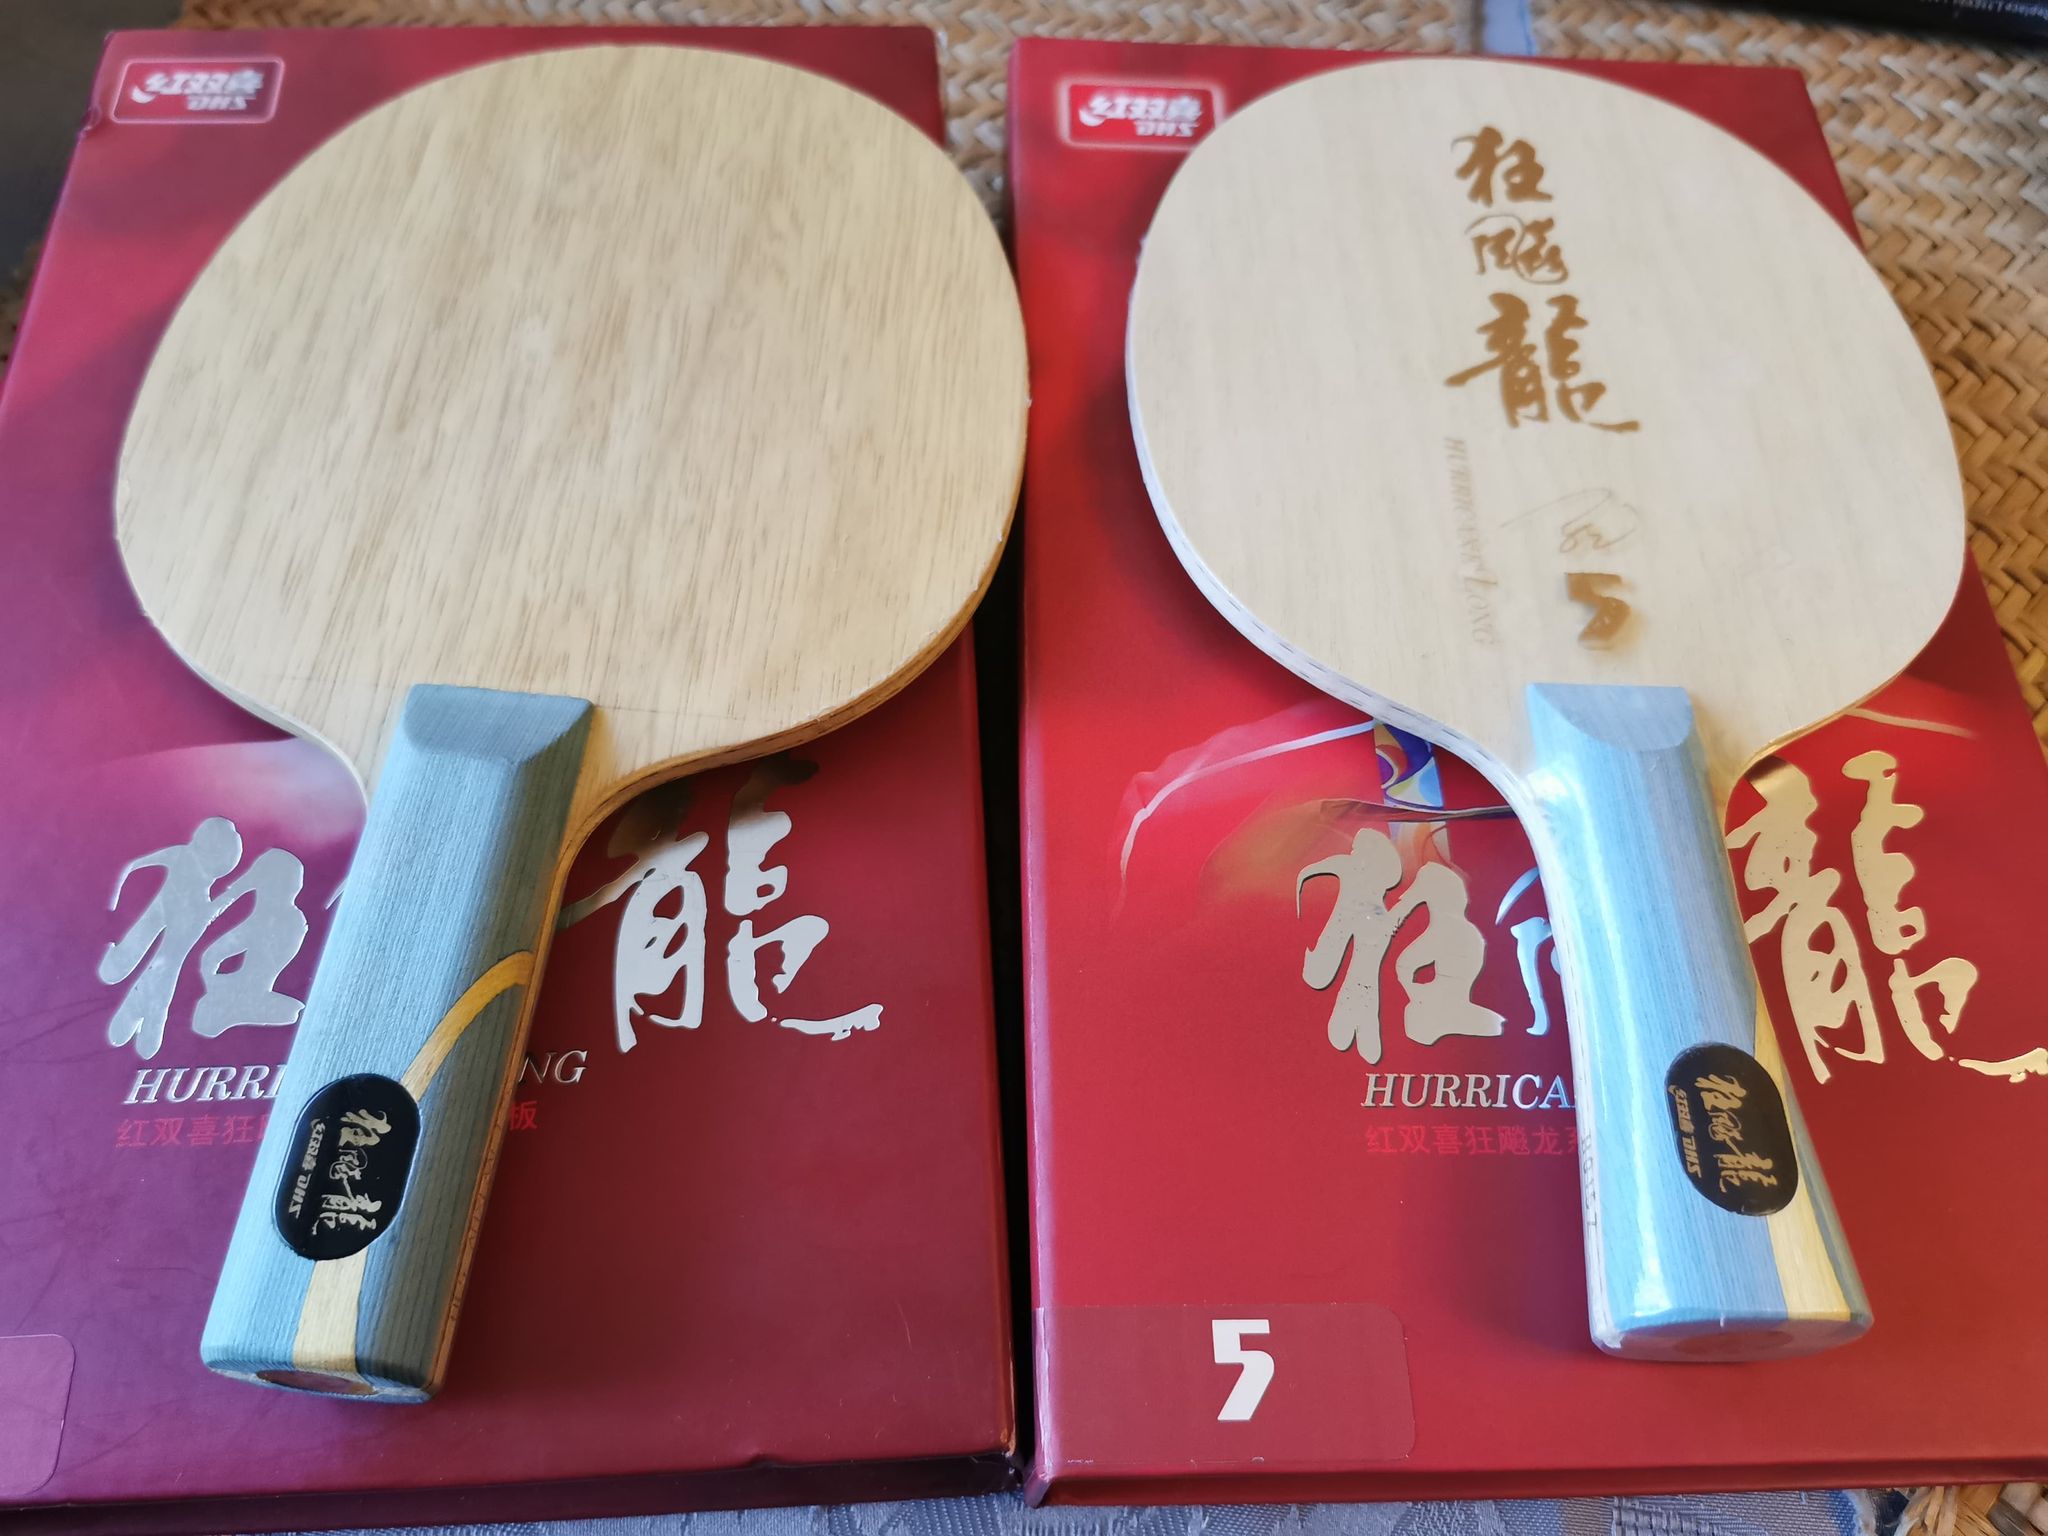 Another Drama (DHS LONG 5 Provincial or Commercial | TableTennisDaily